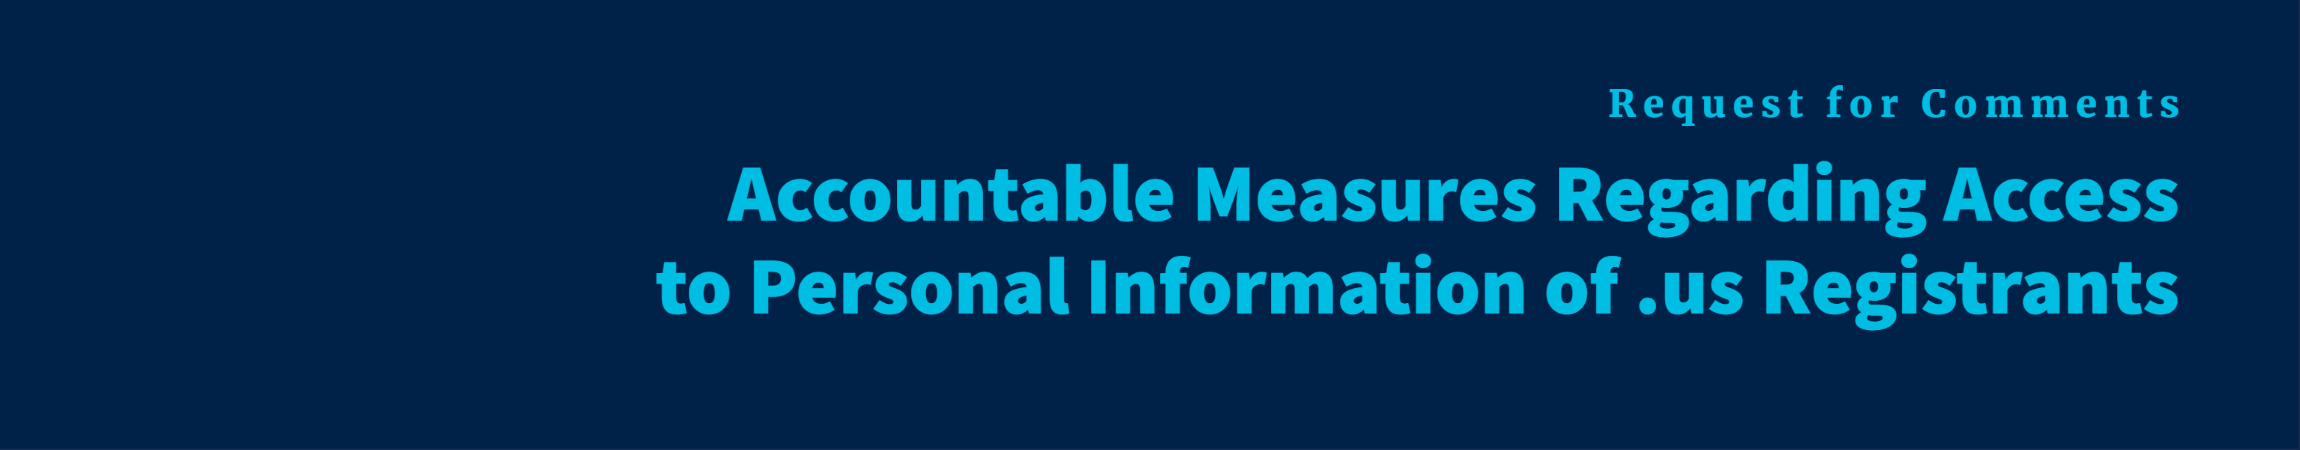 NTIA Seeks Comment on Accountable Measures Regarding Access to Personal Information of .us Registrants